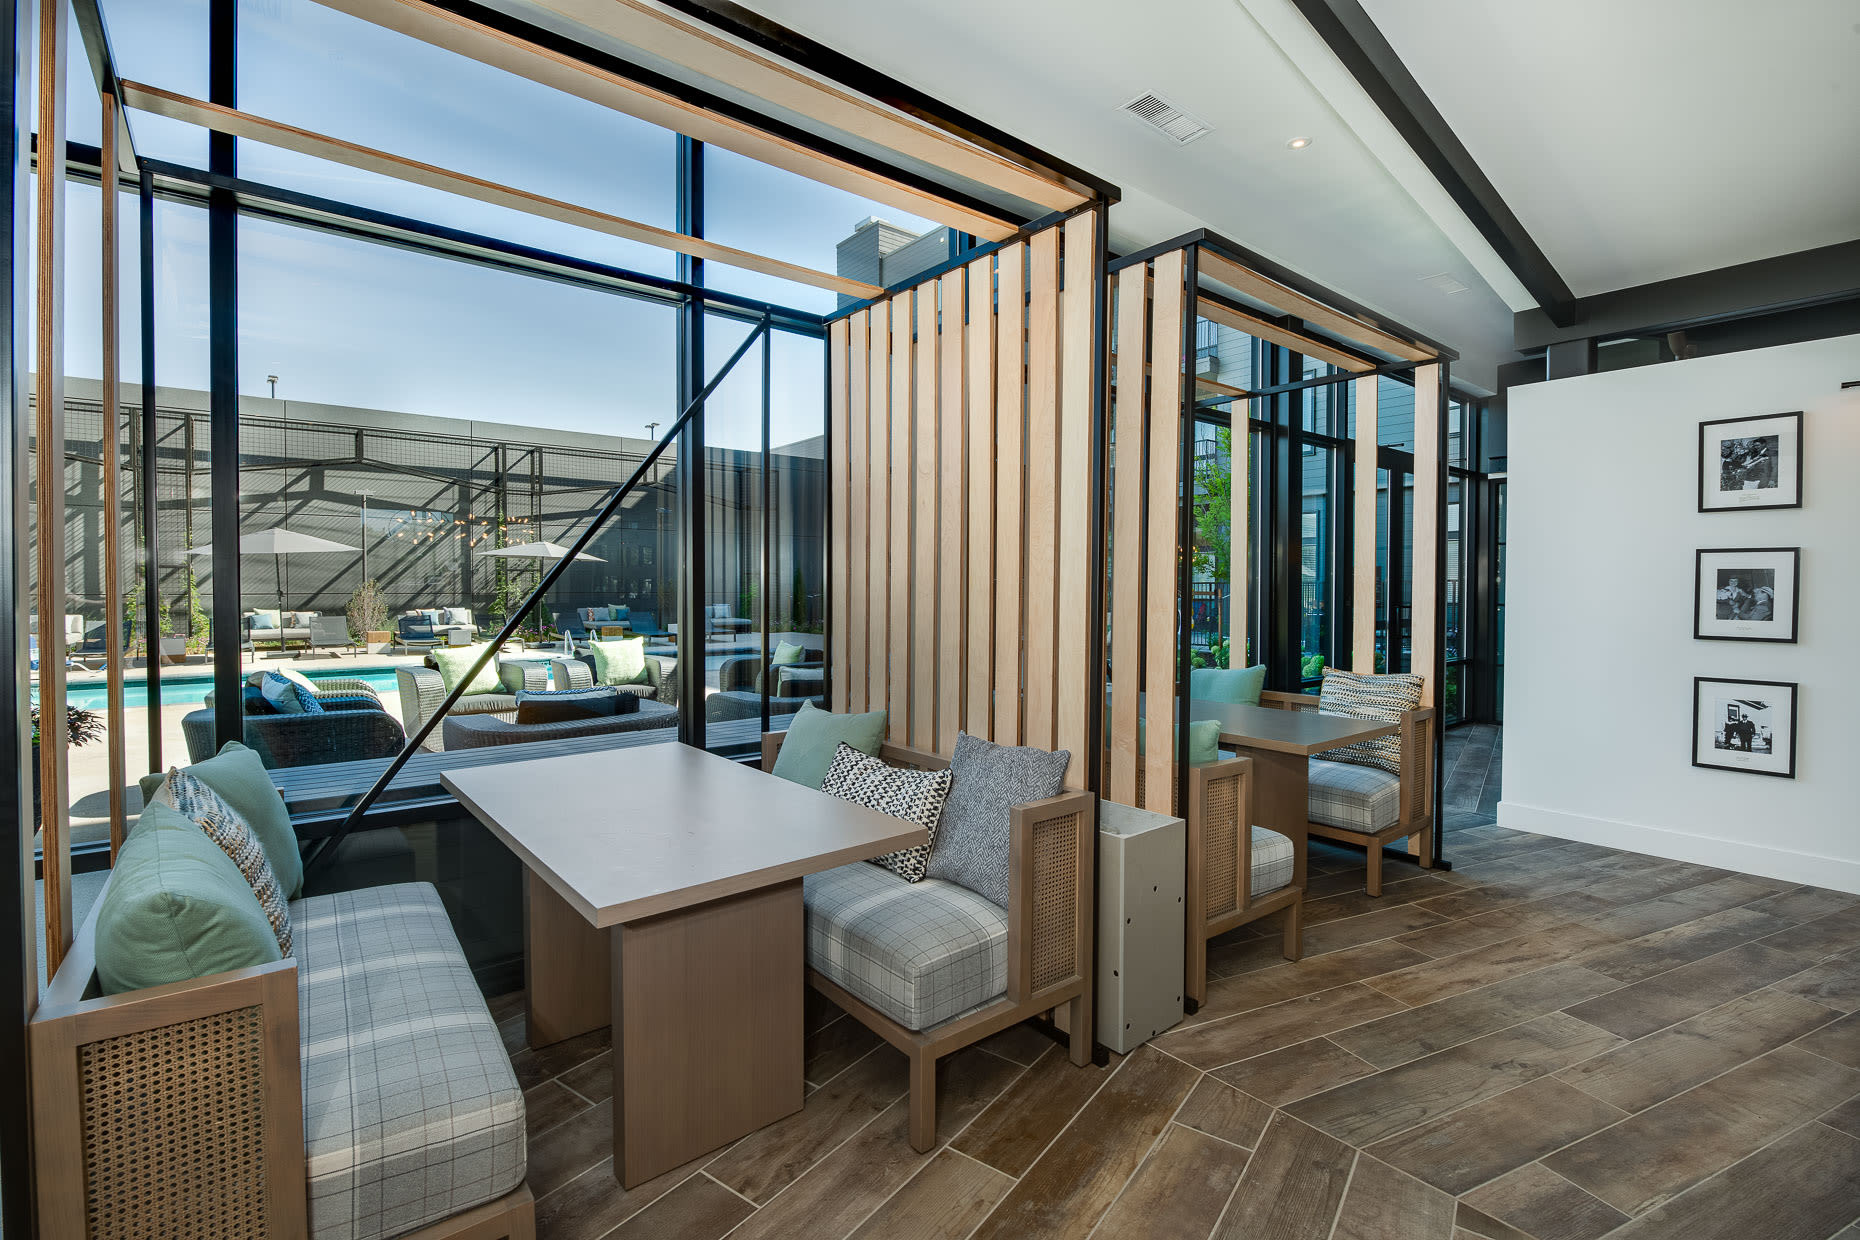 Sitting areas with tables to socialize in the clubhouse at West 38 in Wheat Ridge, Colorado